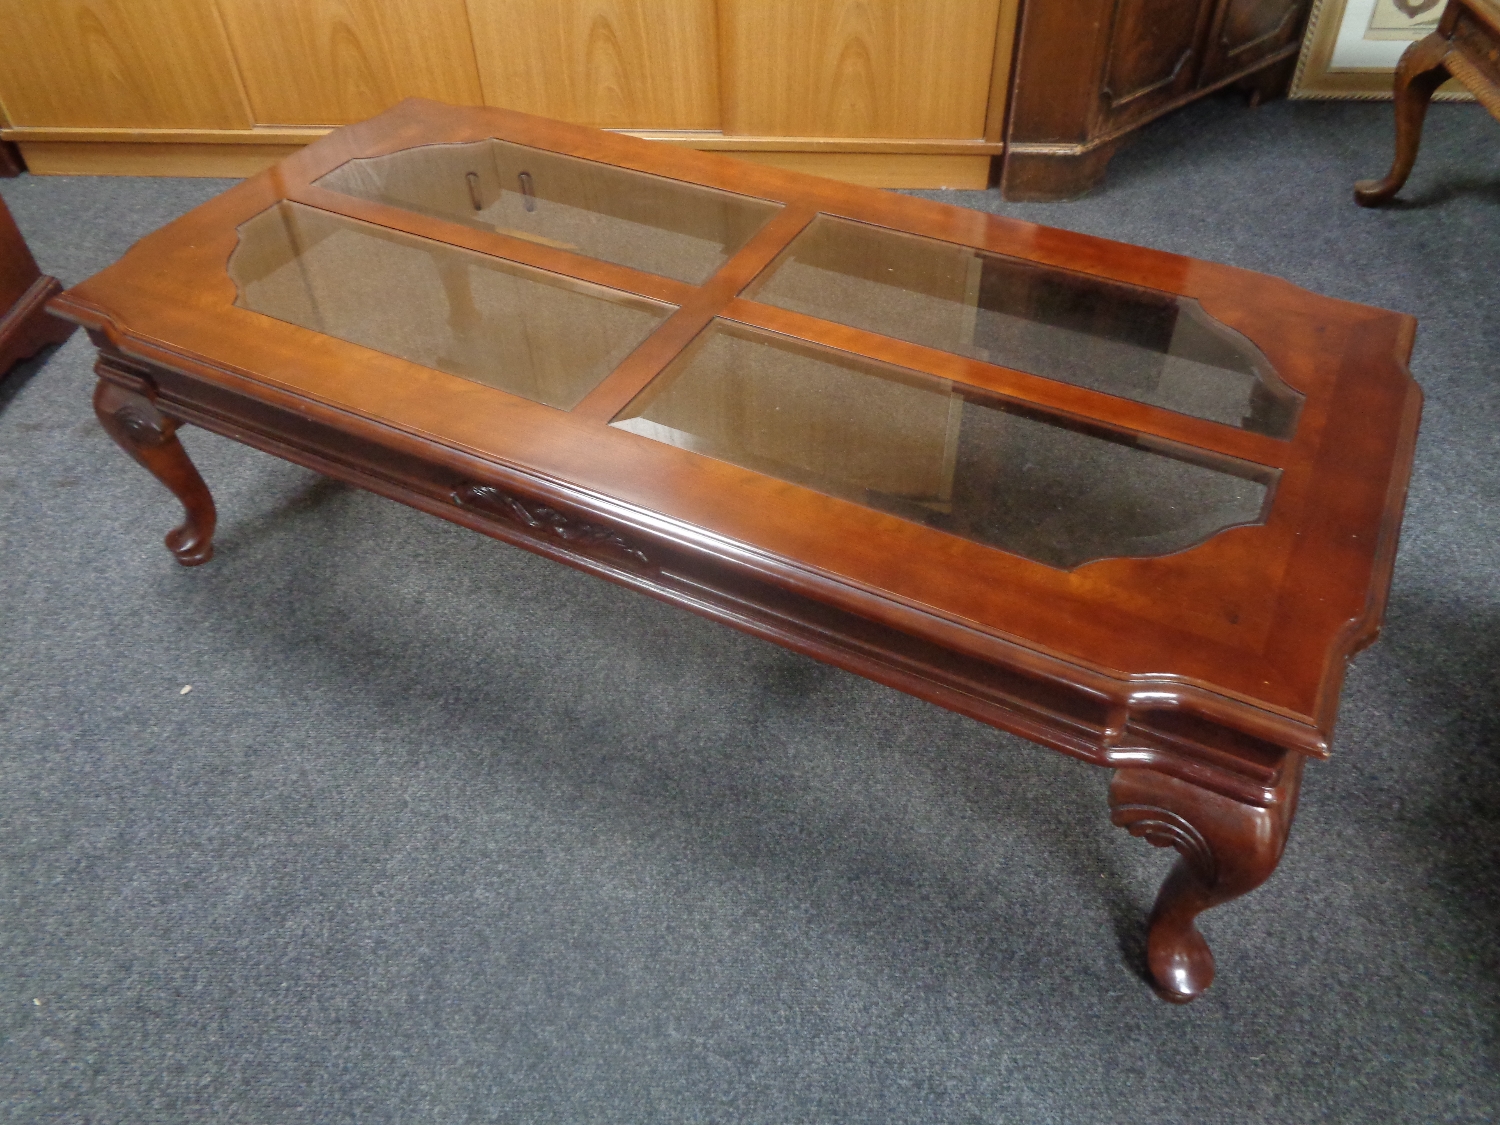 A contemporary rectangular coffee table on cabriole legs with four glass inset panels